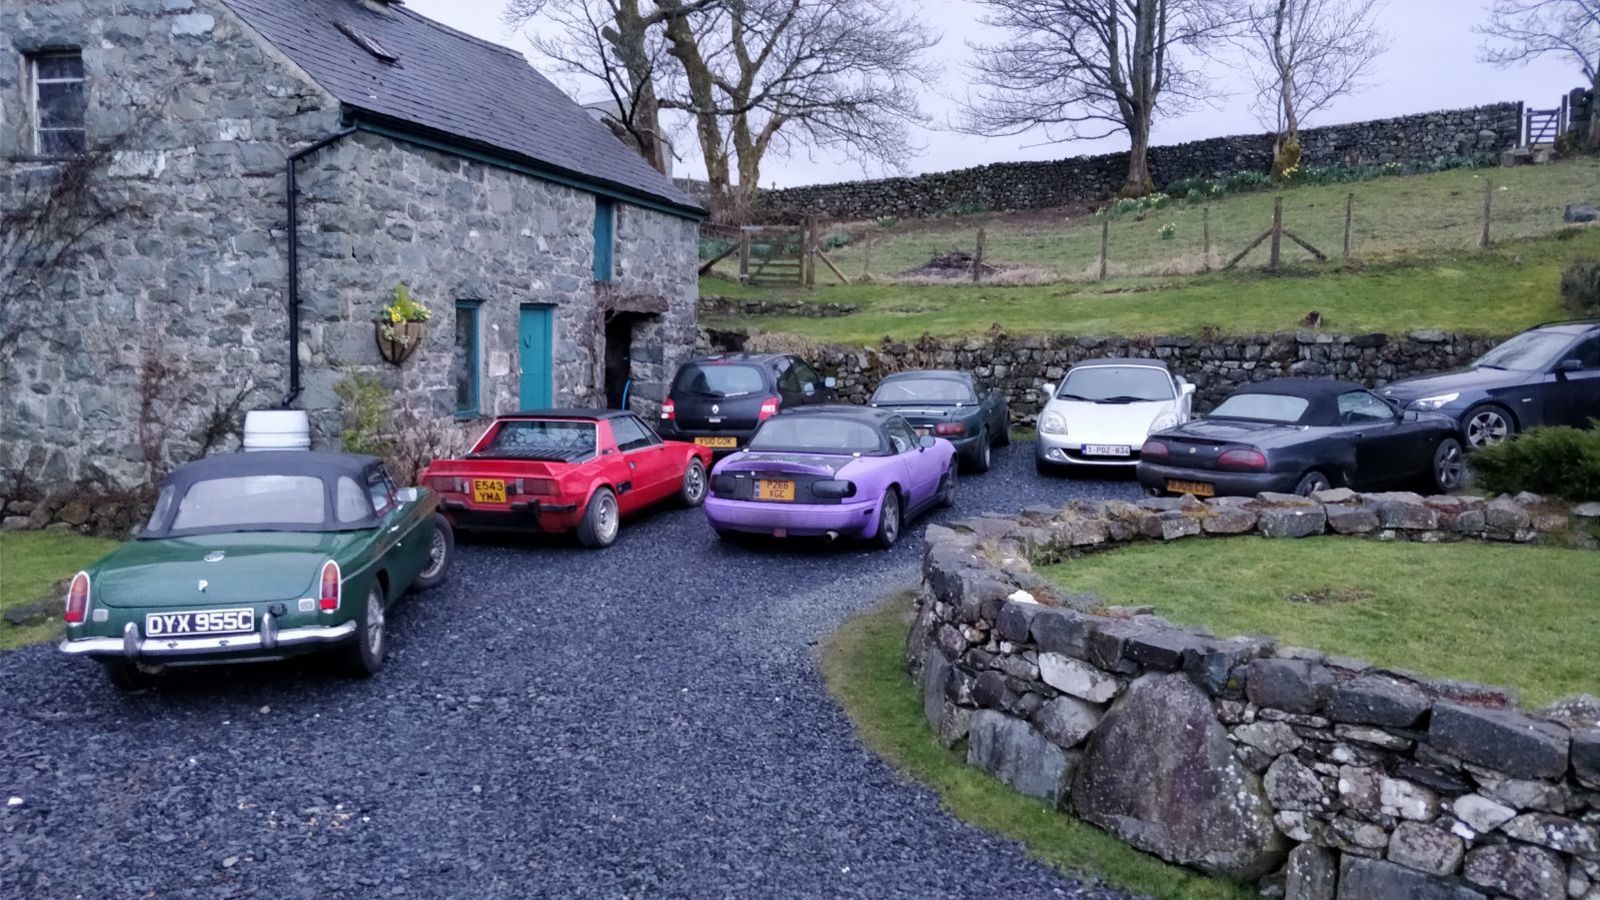 4muddyfeet’s MGB, the X1/9, Twingotamer’s Twingo, my sister’s purple 5, my mate’s turbo 5, Out with a W’s MR2, my MGB driven by my other mate, and Klaus Schmoll’s E60 :) many missing from the pic, but it was difficult to get everyone in!